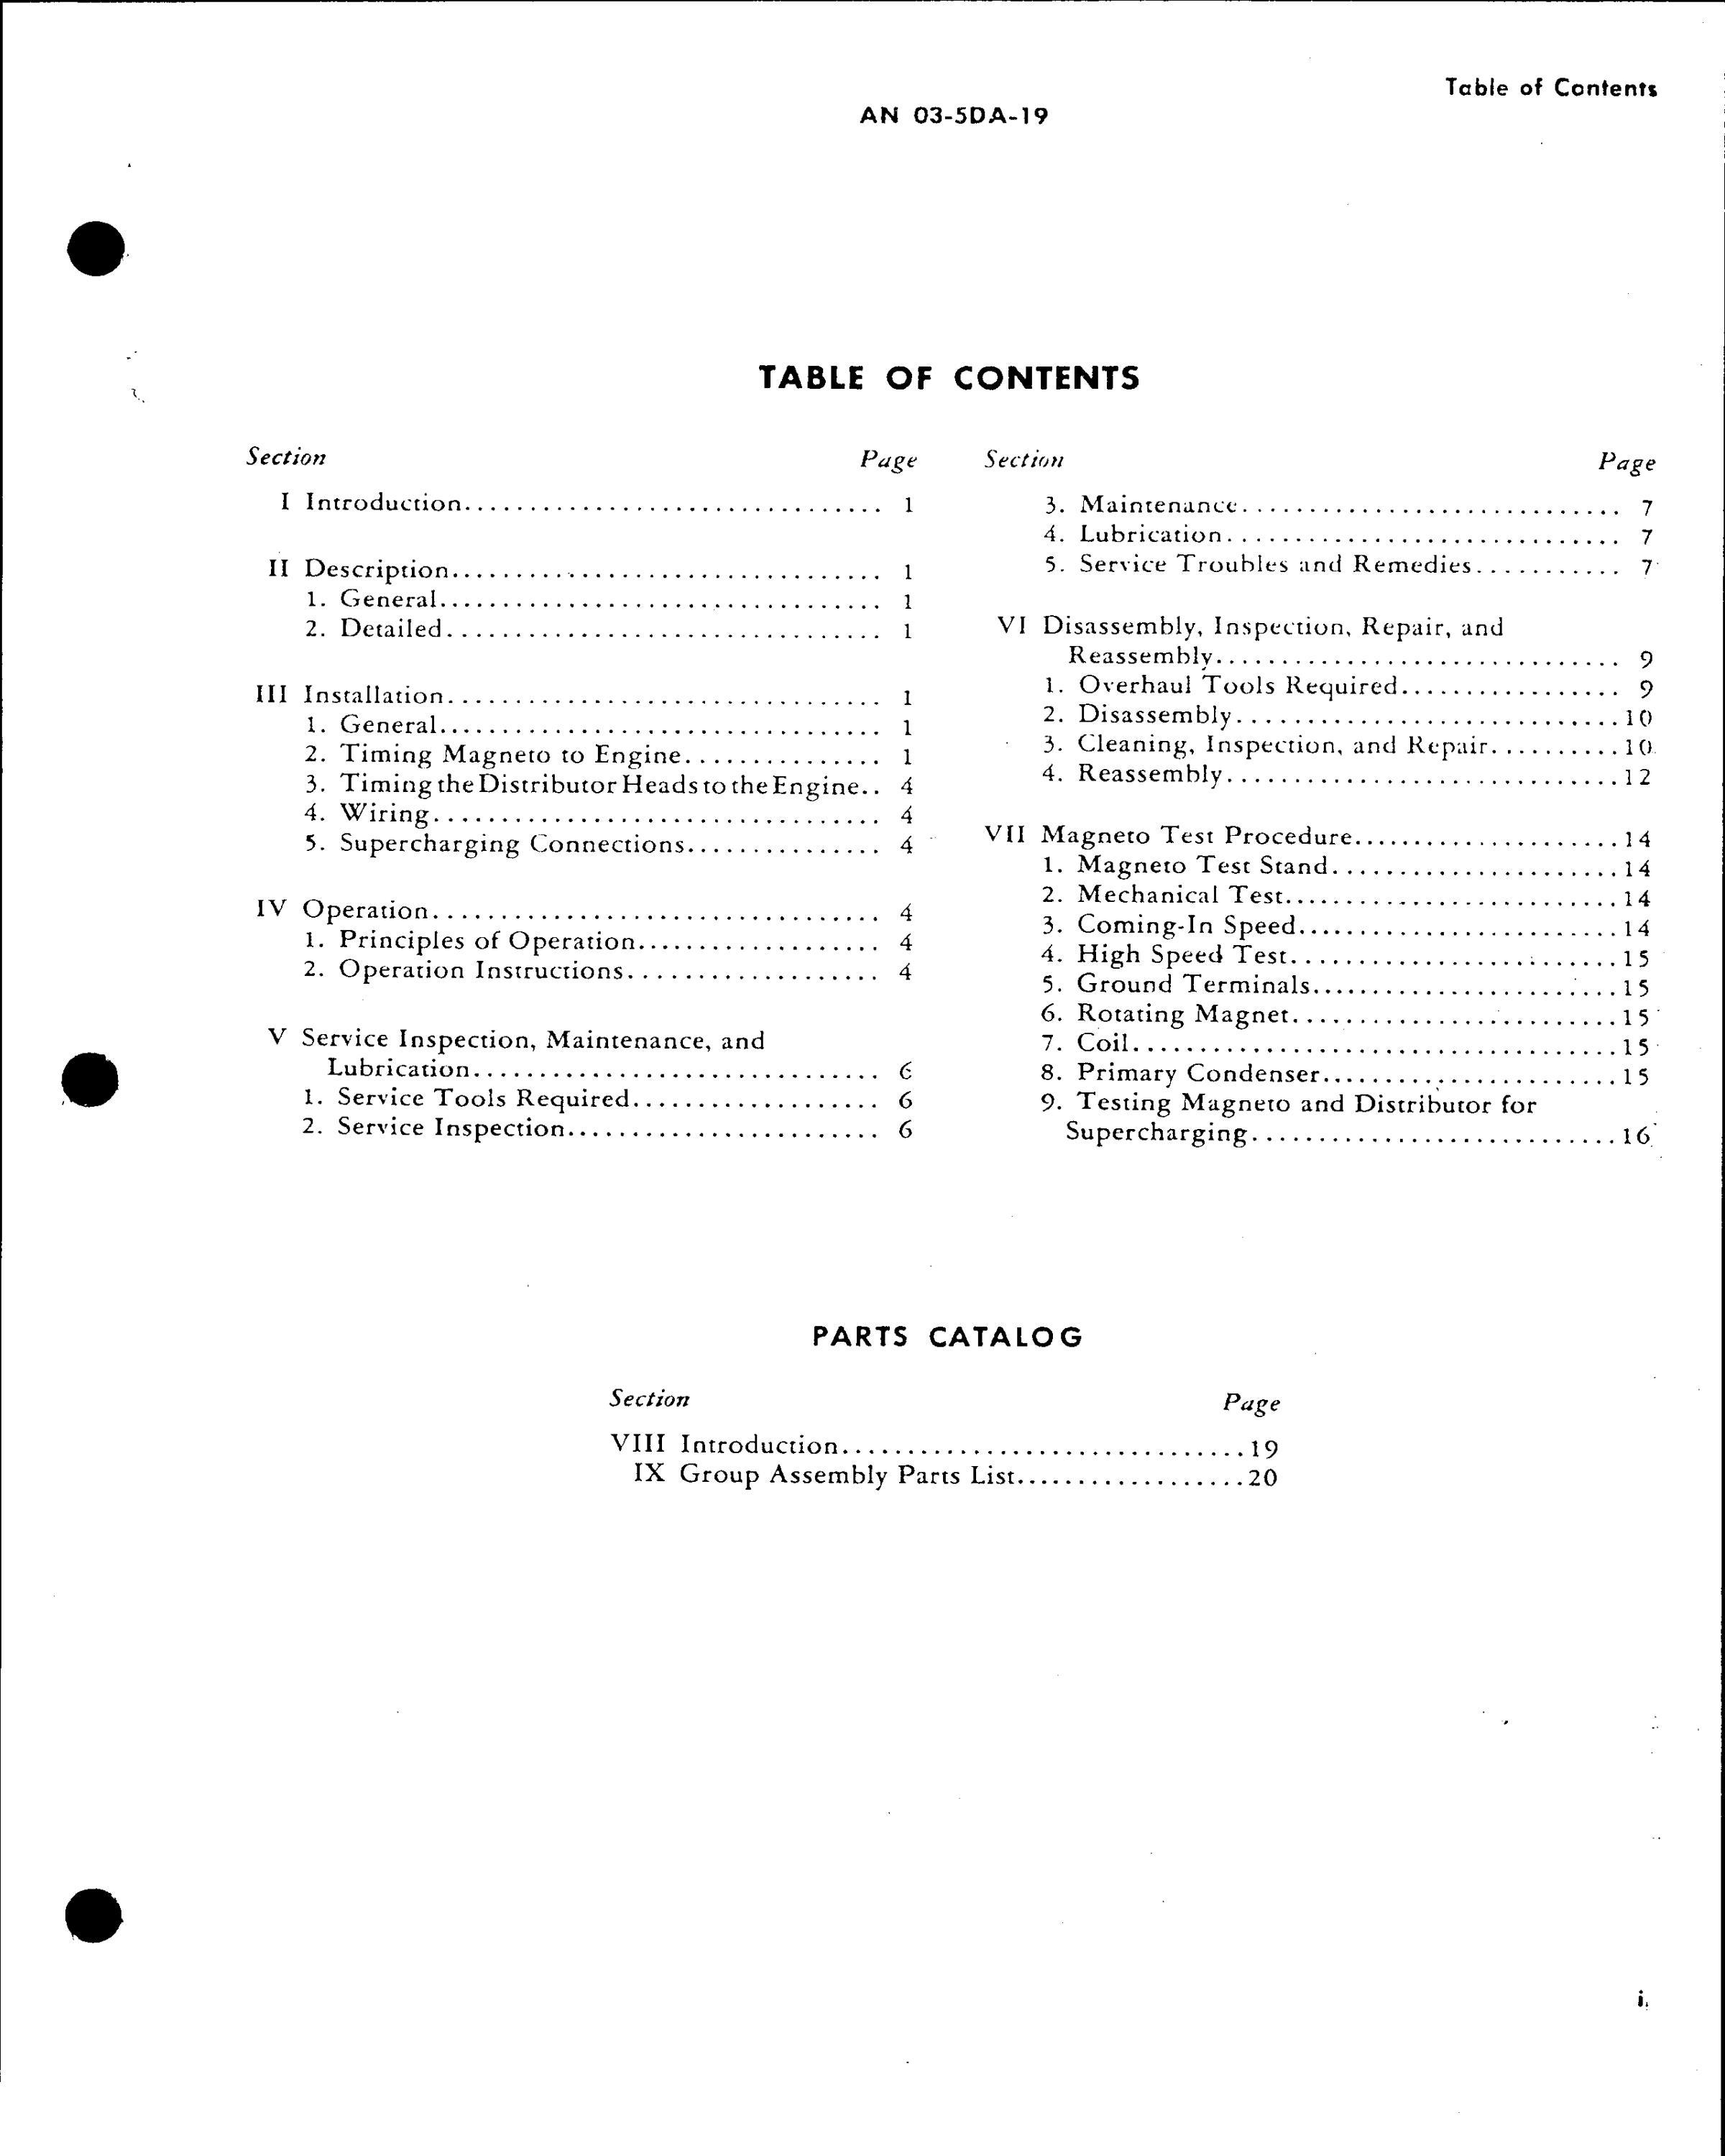 Sample page 3 from AirCorps Library document: Operation, Service, & Overhaul with Parts Catalog for Magneto Type DFLN-5